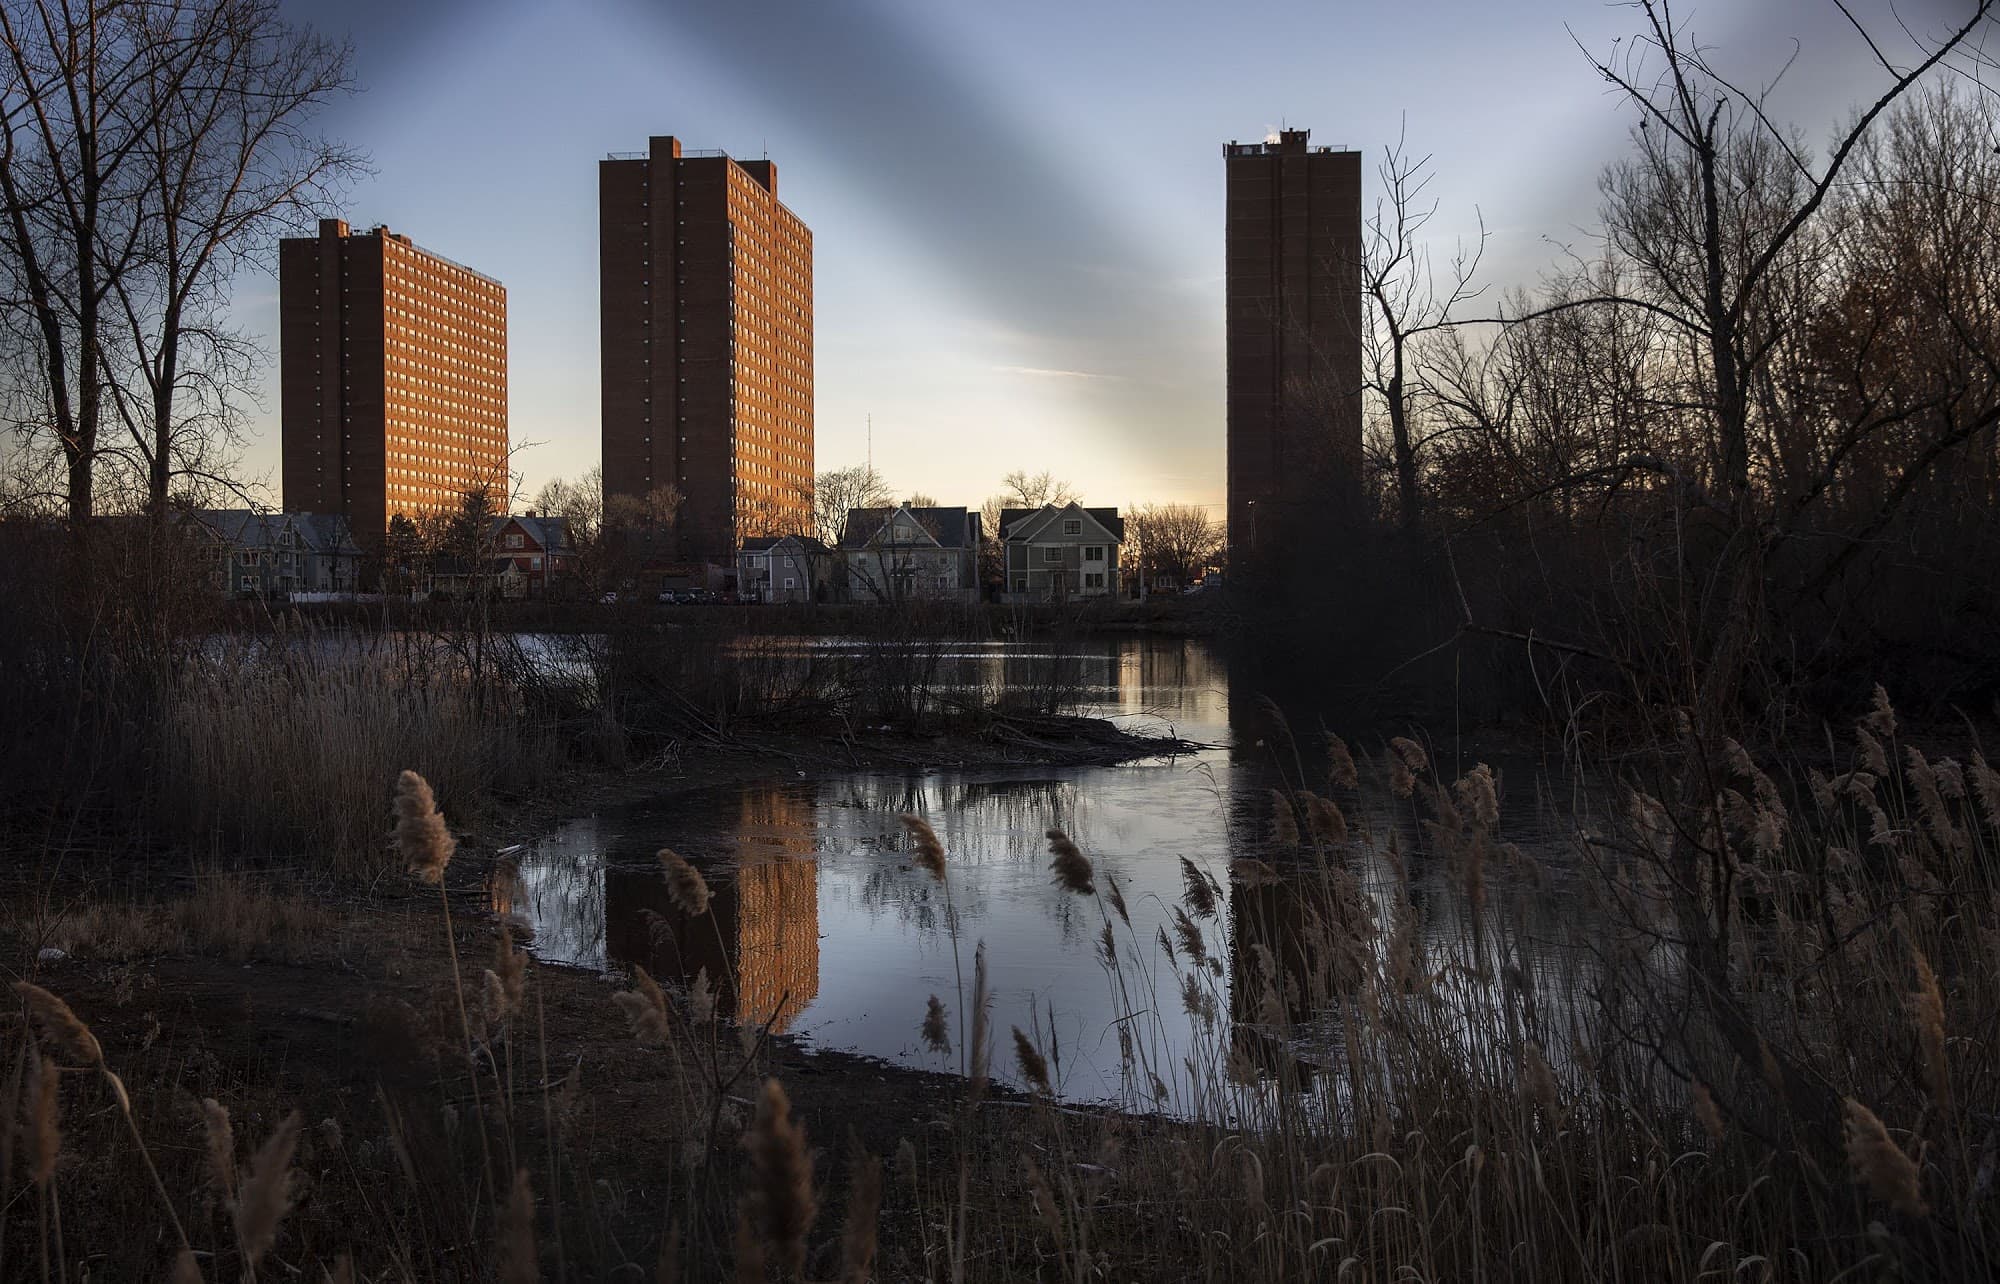 Rindge Towers on a winter evening seen from across Jerry's Pond. (Robin Lubbock/WBUR)